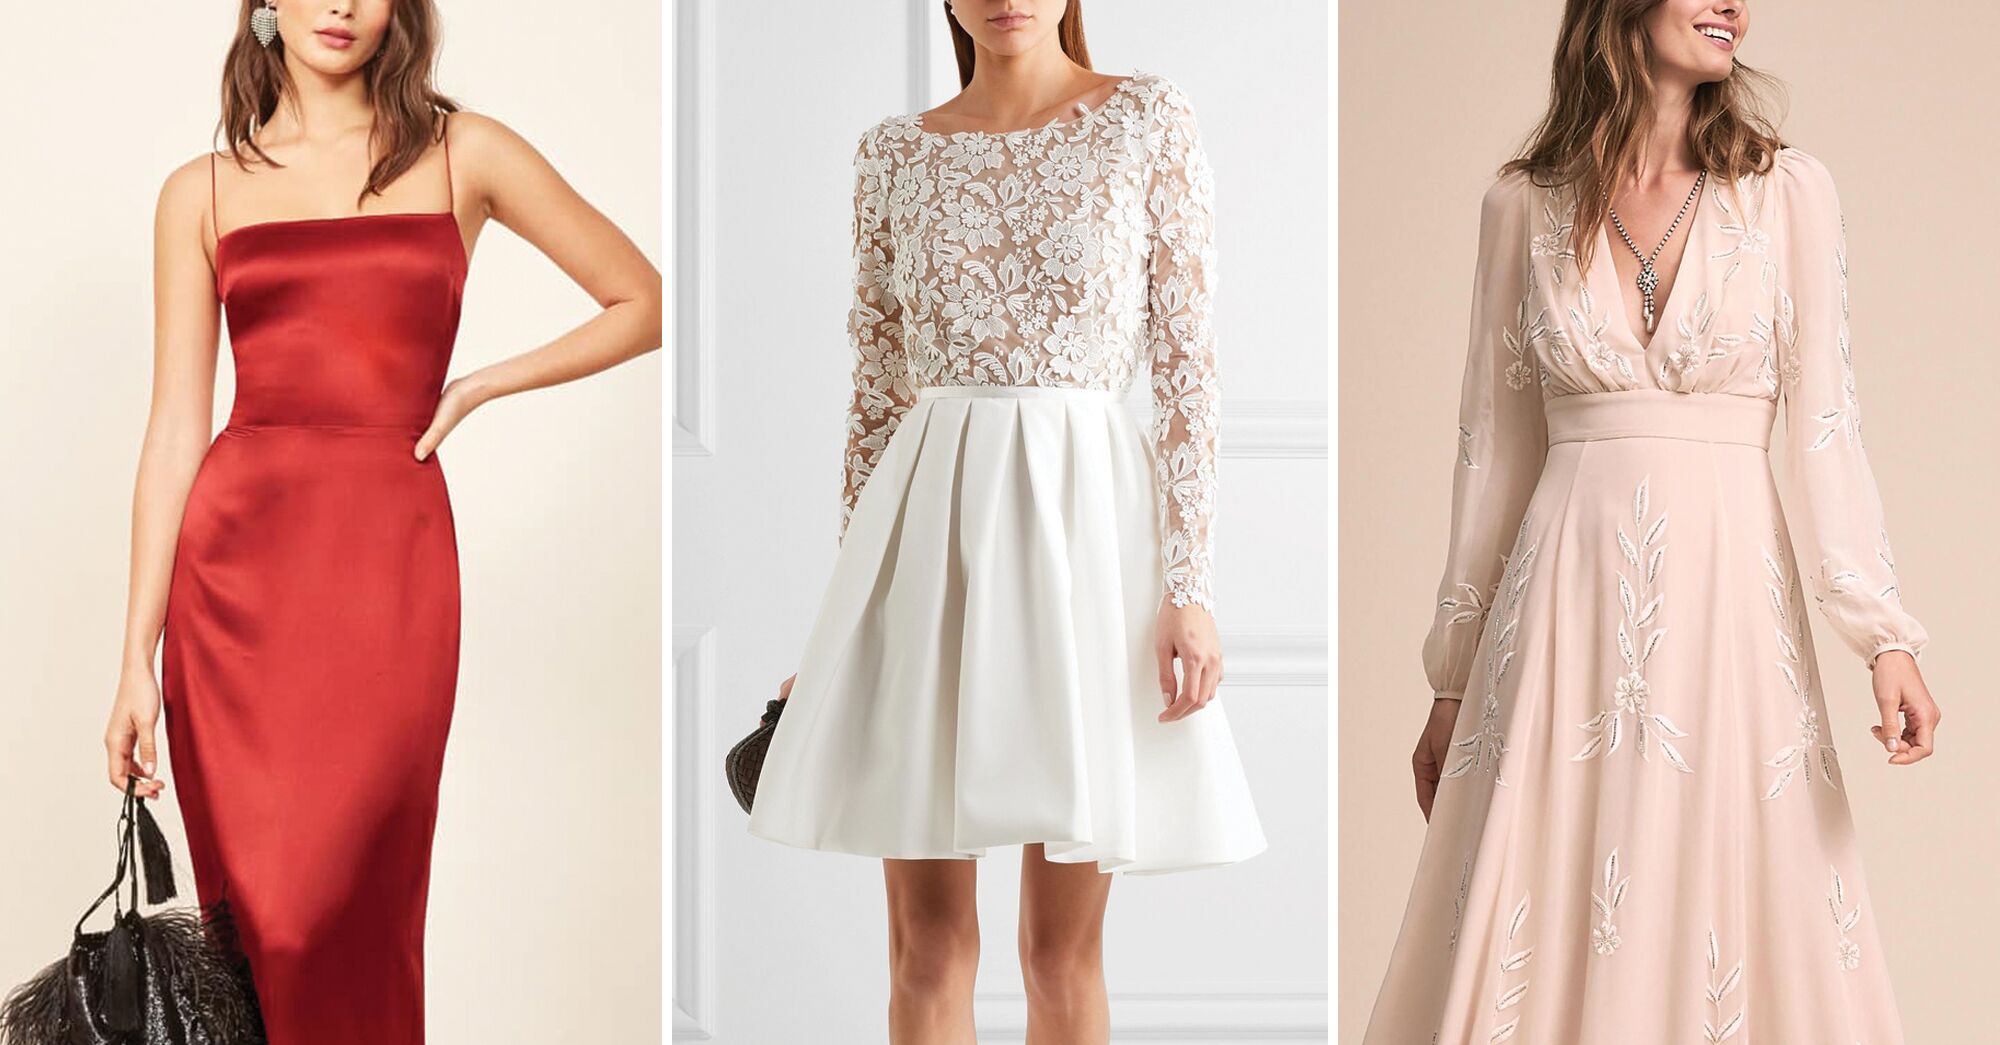 Rehearsal Dinner Dresses: 15 Rehearsal Dinner Dresses You'll Love